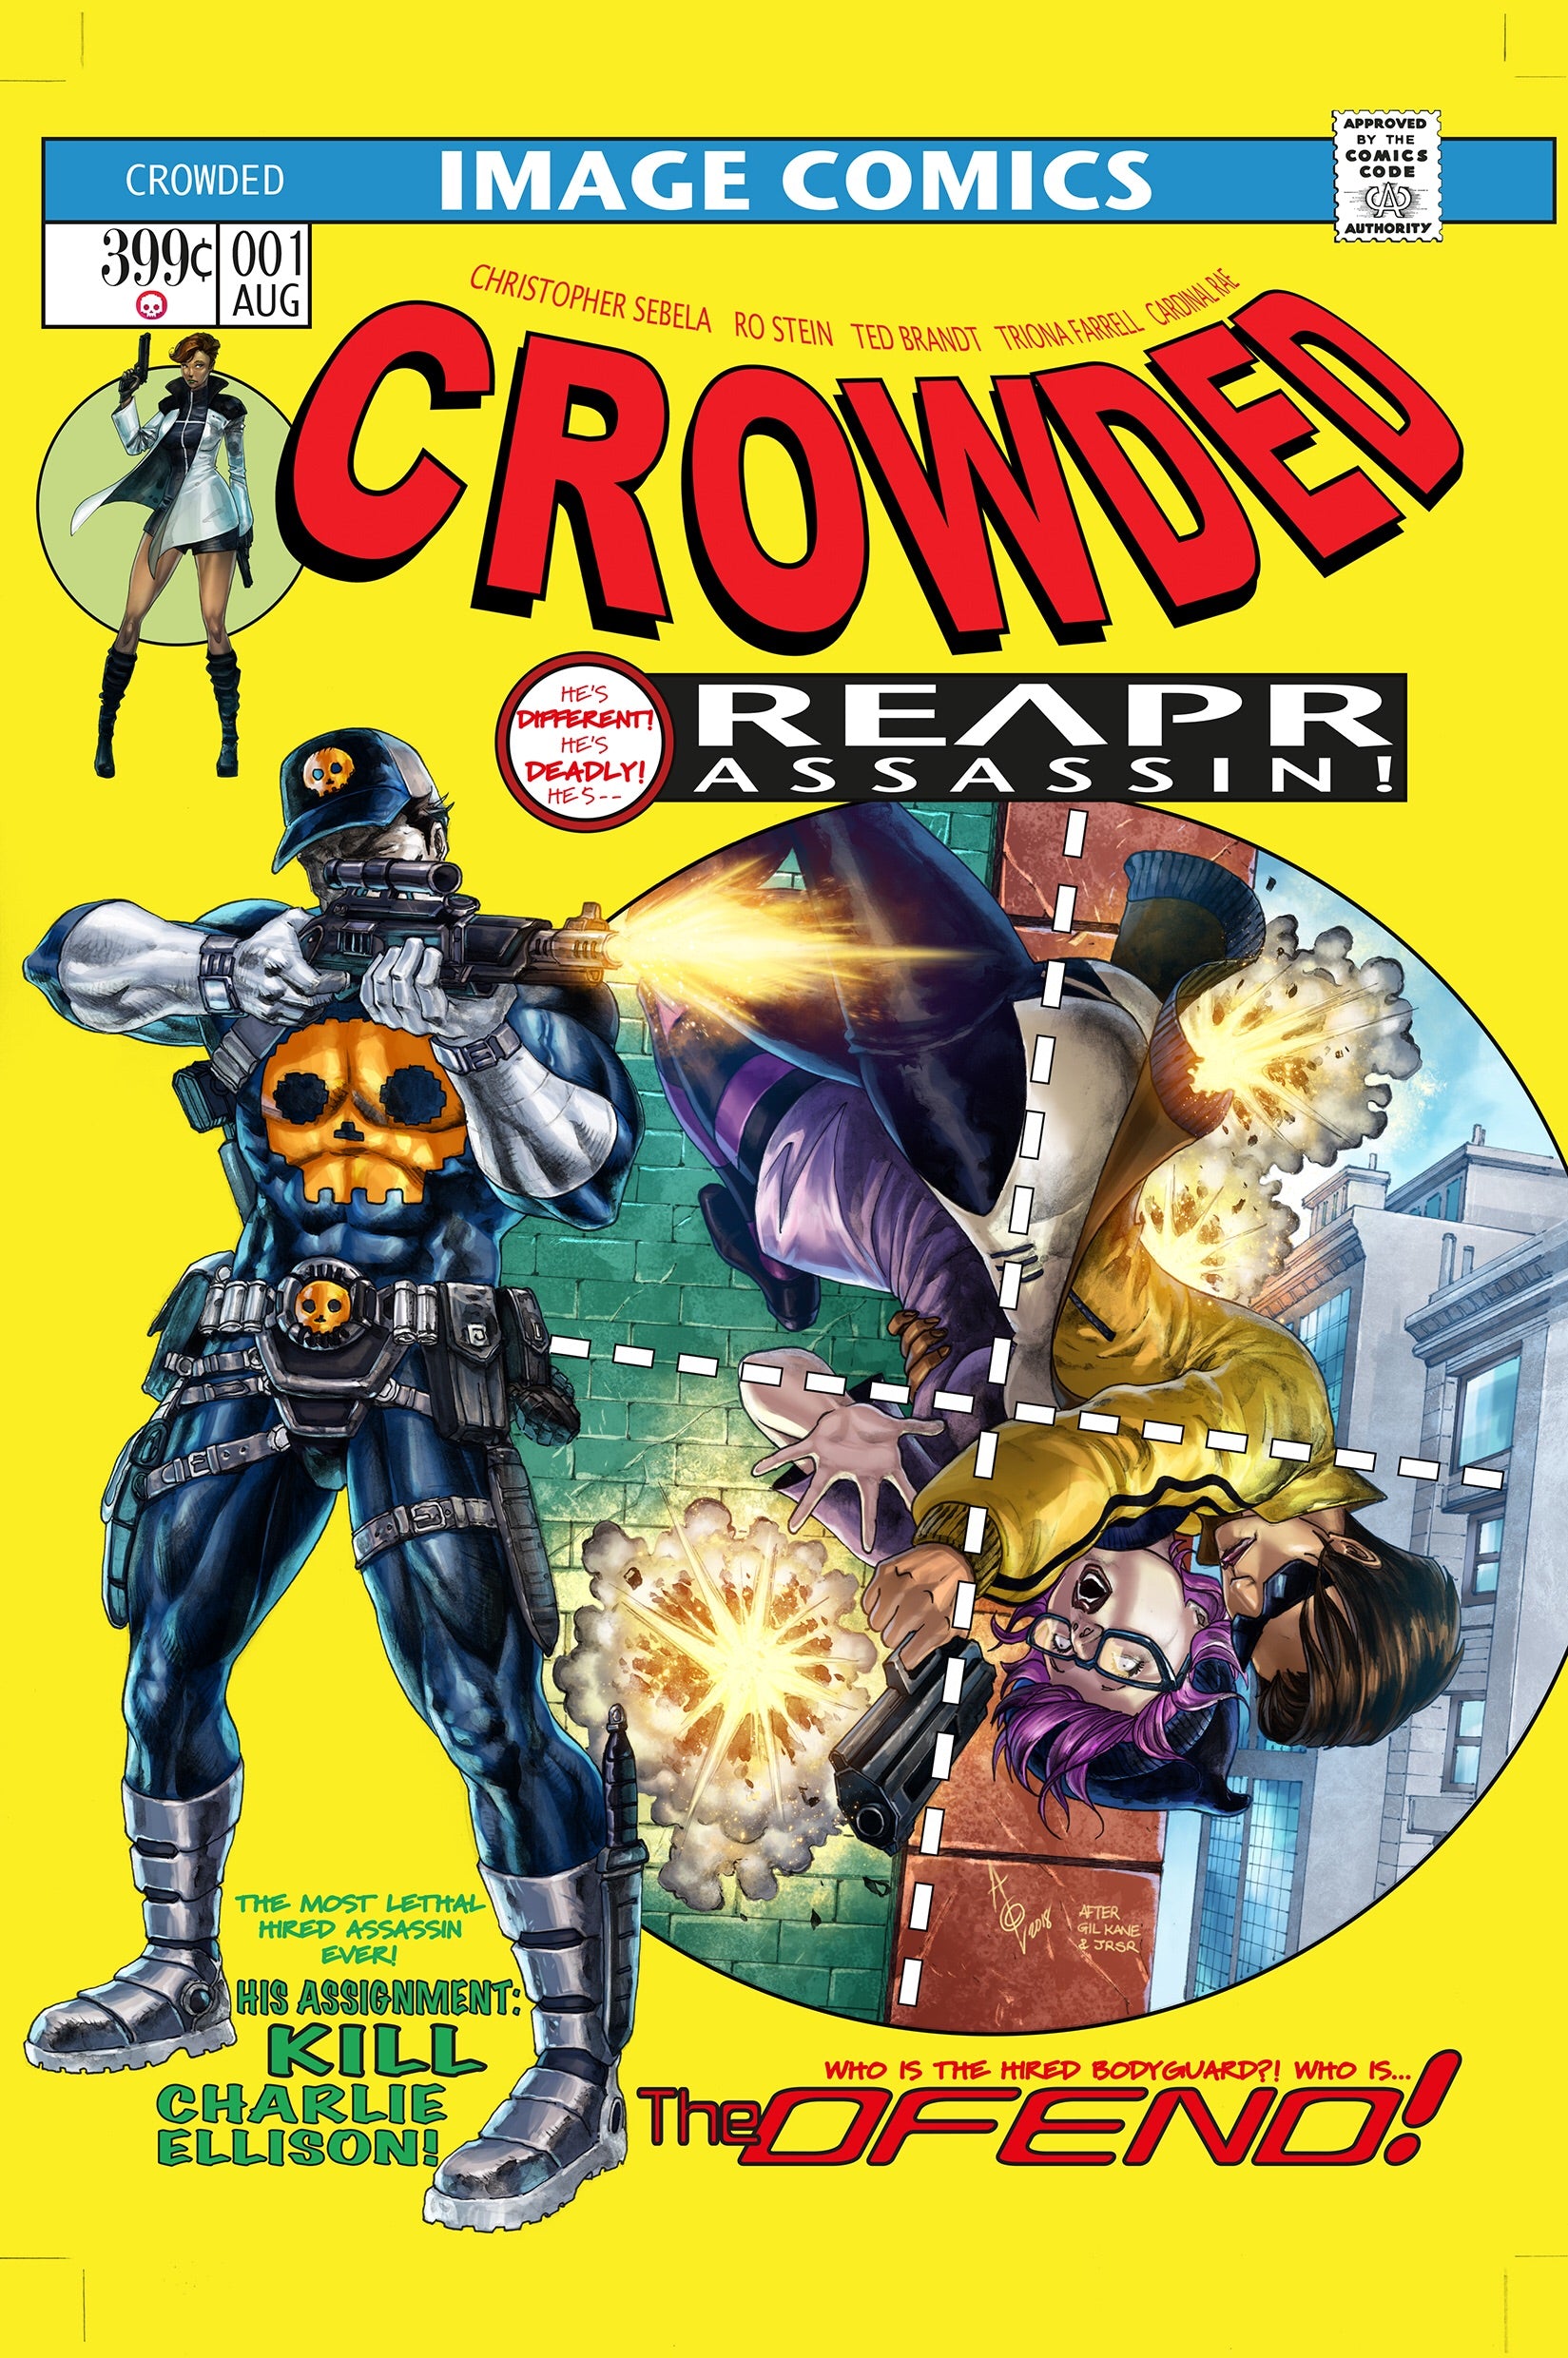 CROWDED #1 ALAN QUAH EXCLUSIVE LTD TO 500 COPIES